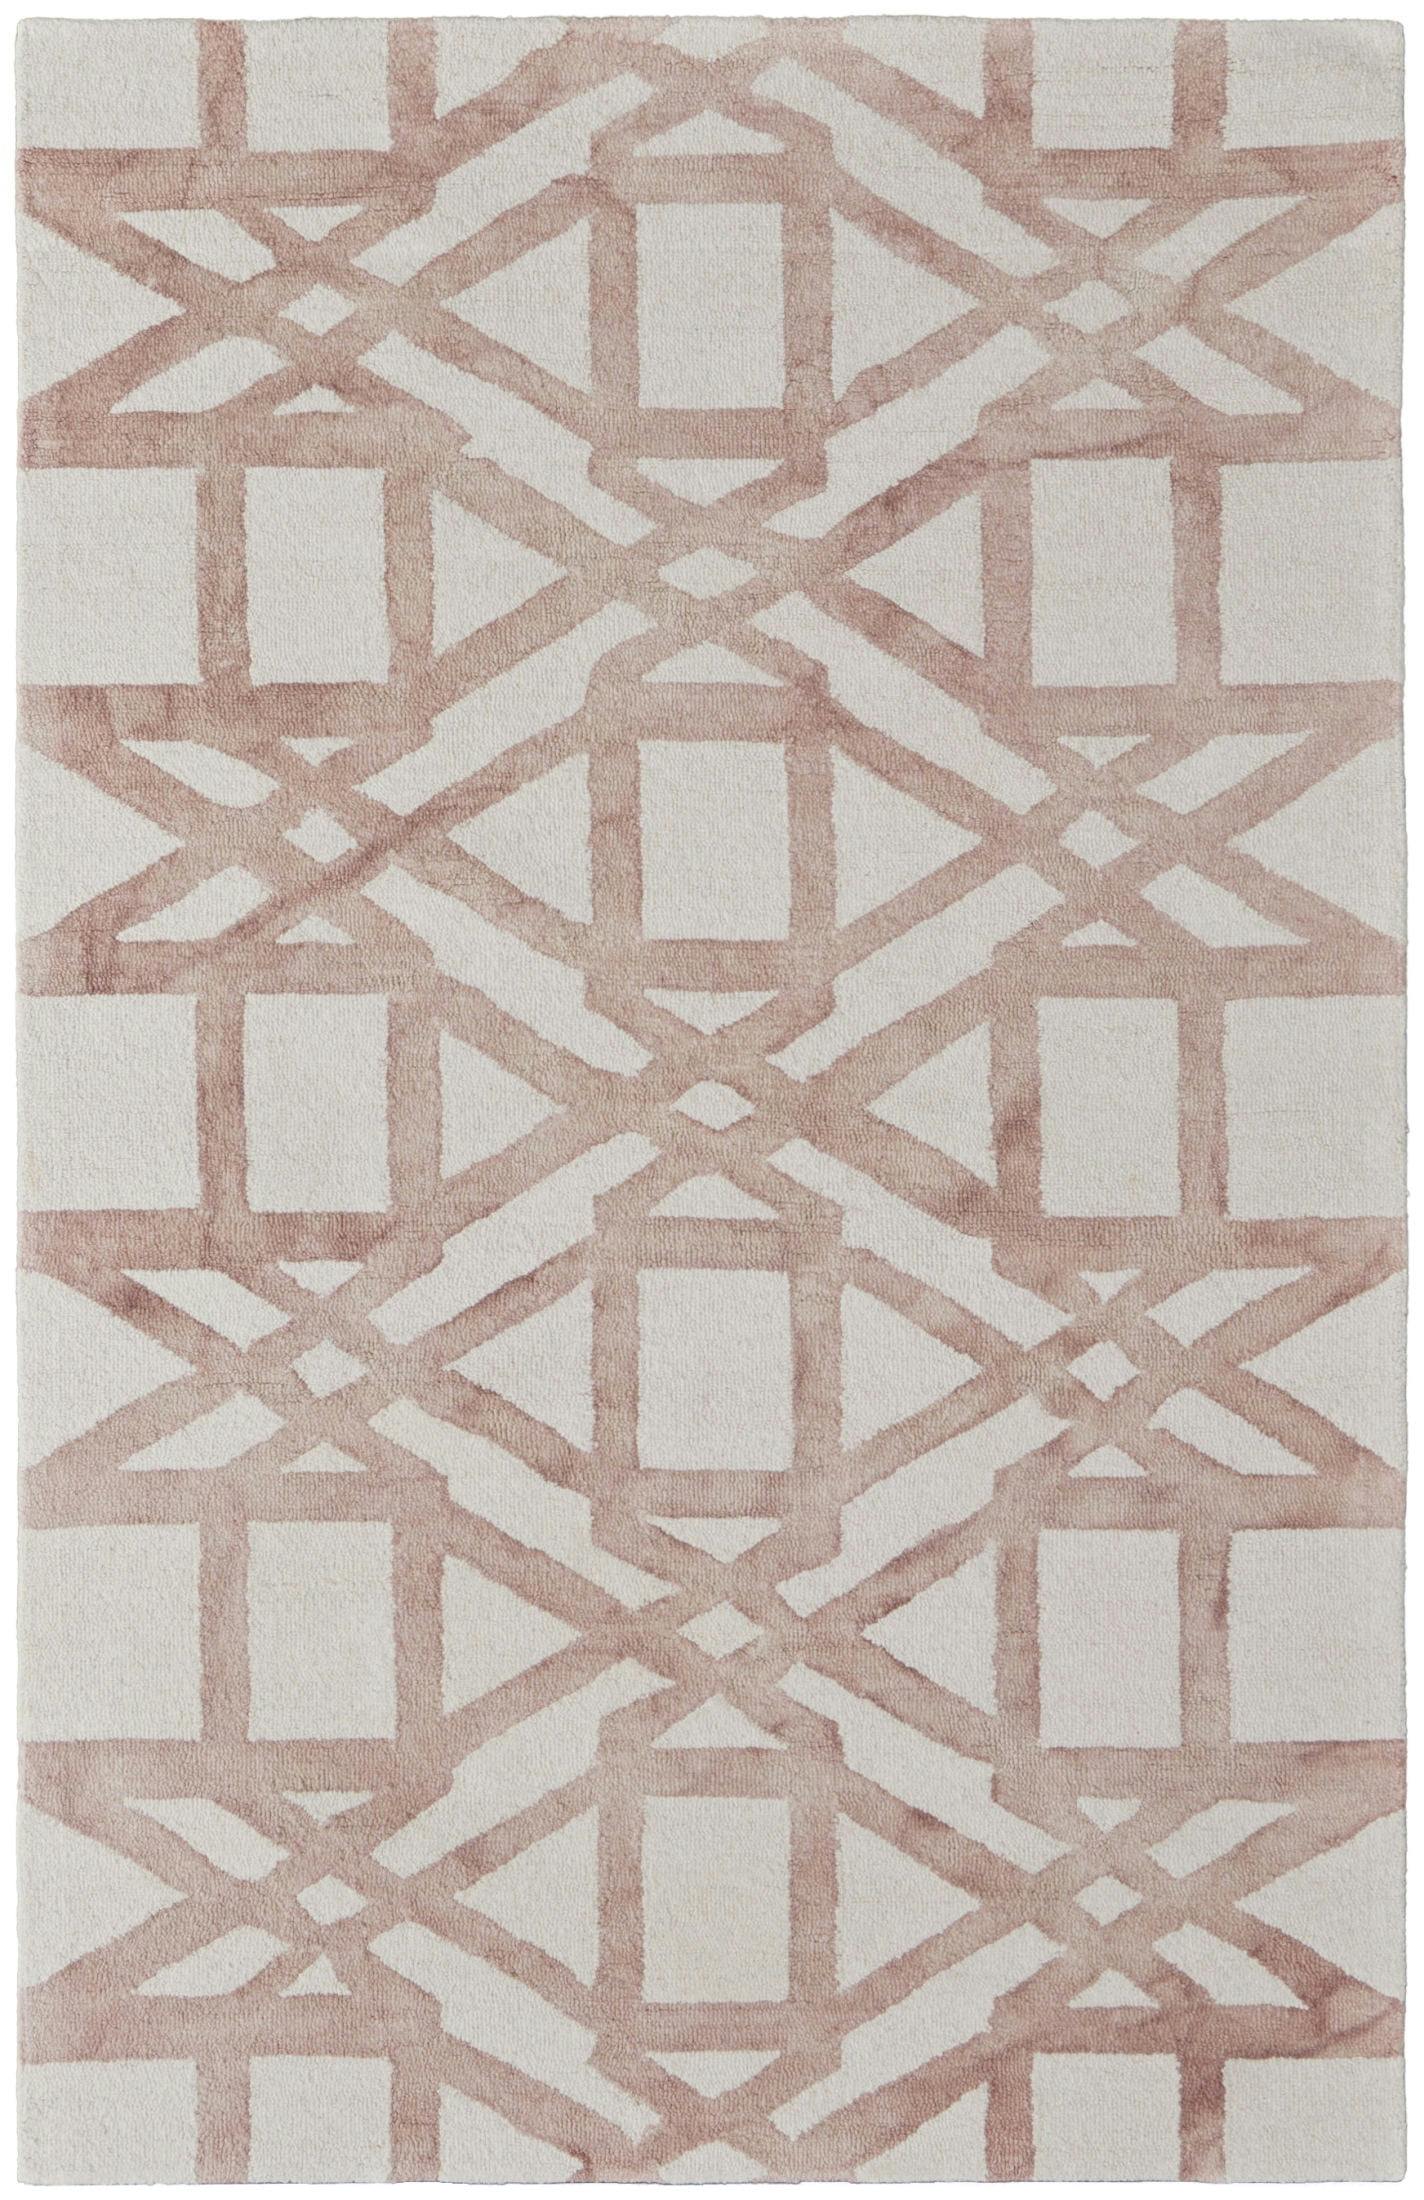 Ivory Geometric Tufted Wool Accent Rug 3'6" x 5'6"